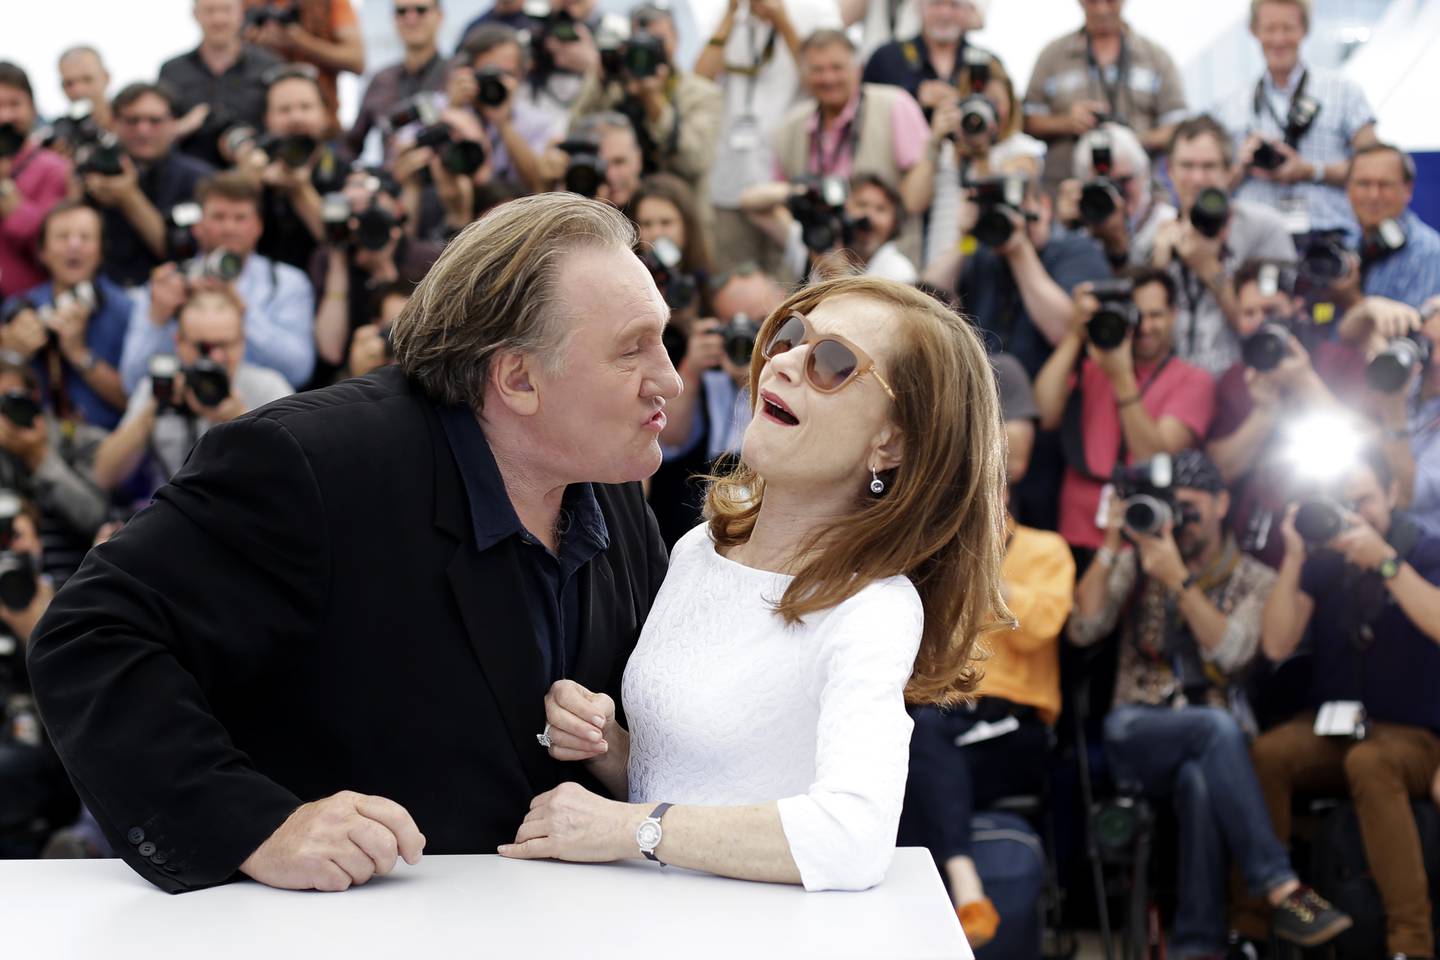 Actor Gerard Depardieu, left, tries to kiss actress Isabelle Huppert during a photo call for the film Valley of Love, at the 68th international film festival, Cannes, southern France, Friday, May 22, 2015. (AP Photo/Thibault Camus)